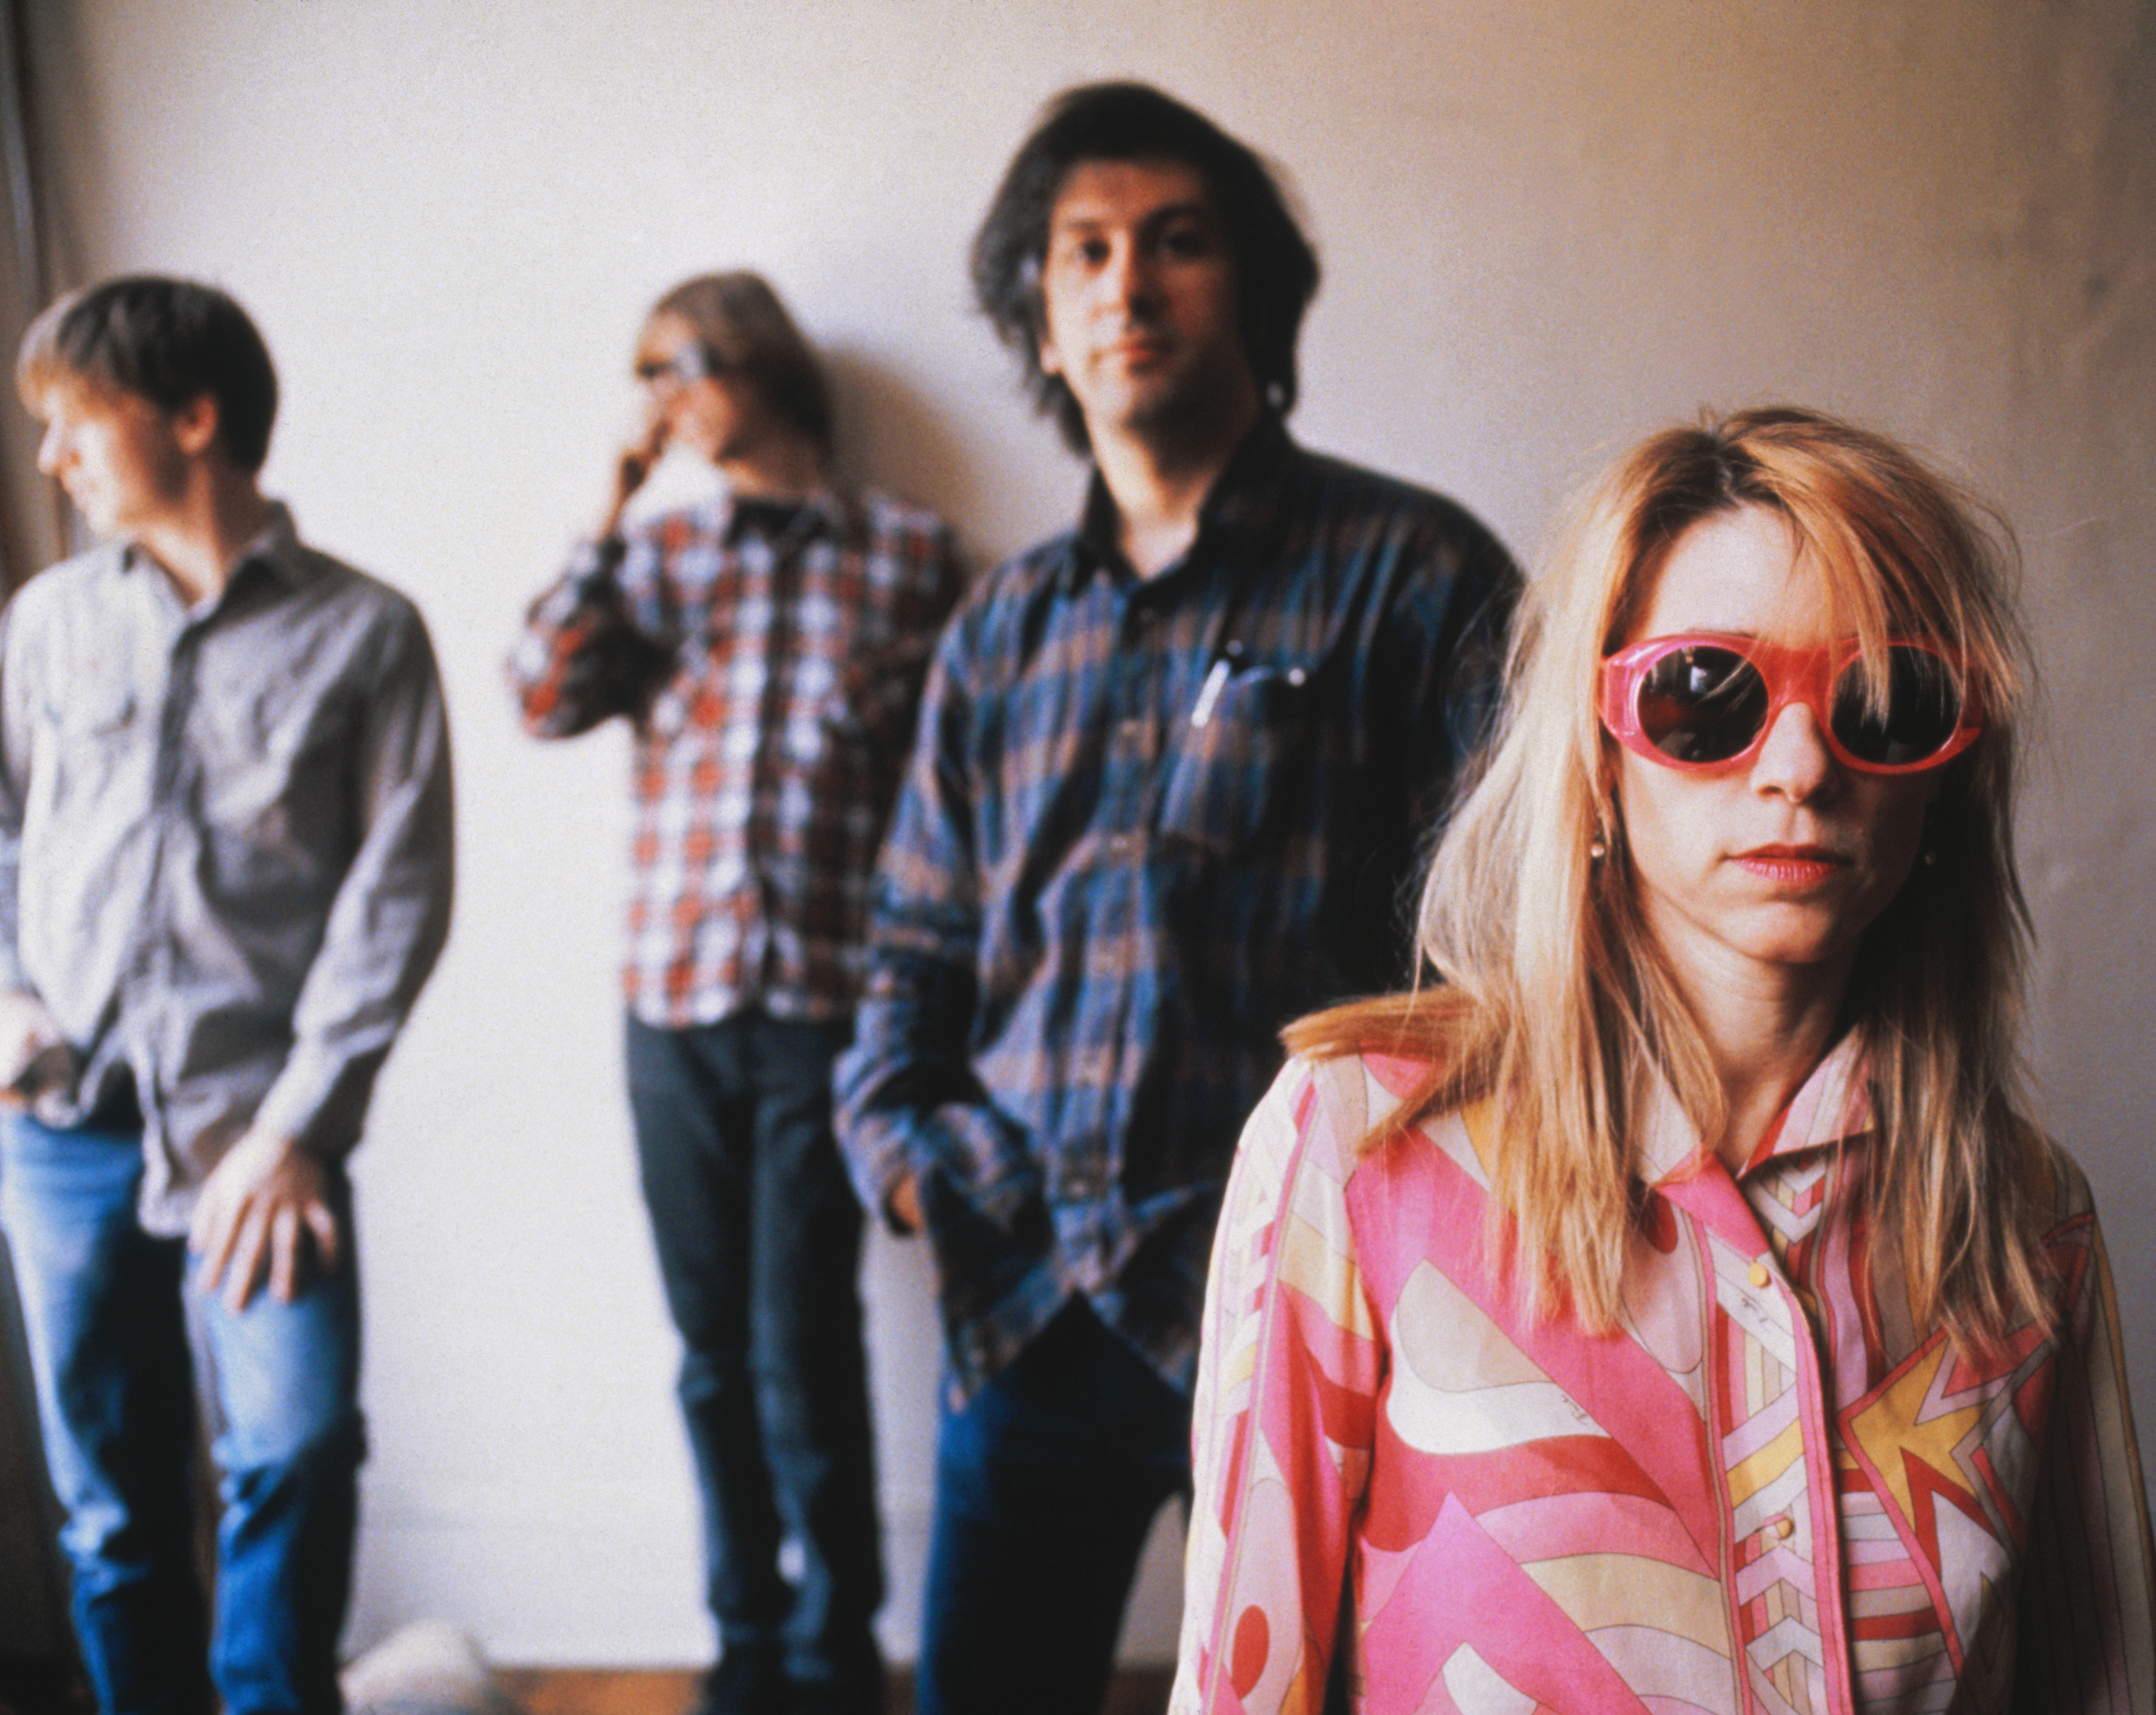 Don't Give Me Your Soul: The Oral History of Sonic Youth's <i>
<p><strong>THE STUDIO</strong></p>
<p><strong>Moore:</strong> God only knows what <em>Goo</em> would have sounded like if we did it in Wharton Tiers’ basement. That’s where we did <em>Confusion Is Sex</em> and <em>Kill Yr Idols</em>; maybe <em>Goo</em> would have come out the same way. All I know is that we did some demos for <em>Goo</em> that were more like eight-track demos, and there’s aspects of those that I find more interesting than what happens coming out of a 24-track board. I really liked the energy on those demos, because it sounded like the 24-track kind of spread things out a bit and it’s slightly more dissipating. It’s a learning process, the technology of it all. We were never a studio band in the sense of Pink Floyd or Steely Dan, where they were really utilizing every inch of it. We came to do that when we had our own studio, Echo Canyon, later on in the ’90s.</p>
<p><strong>Kim Gordon:</strong> We were excited. That was our first getting-out-of-the-basement-type recording situation. I mean, we did record at Sear Sound. But Sear Sound at the time was pretty lo-fi. But in a great way.</p>
<p><strong>Ranaldo:</strong> It was our first major-label record; we were second-guessing ourselves, like, is this mix good enough? This is pretty easy to do in the studio. And I’ve seen this happen to other bands from our scene that graduated to a major and got freaked out a little bit about making their first record. We weren’t sure the mixes with Nick Sansano were what we wanted, so we stopped working with him after a couple of sessions. We were desperate to try and finish this record, so the label brought in Ron St. Germain and we kind of referred to him as a console cowboy. He was a pilot at one point, I think, so he was really into all the tech stuff. And he did a really good job mixing it, though it was probably not mixed exactly the way we would have on our own.</p>
<p><strong>Moore:</strong> I remember the engineer telling us that we would be using the B-room, because Public Enemy were going to be doing their new sessions in the other room. When we found that out, we were like, ‘Where do we sign?’ This was the perfect situation because I was so huge into <em>It Takes a Nation of Millions to Hold Us Back</em>. When we started recording there, I had everybody involved with that record in the studio at the time, so I have the CD that has like 40 signatures on it with the entire crew of PE somewhere. Ice Cube had come by for one day and was hanging out right when N.W.A was hitting and he had to be in New York. I remember Chuck D calling him ‘Cubism’ and things like that.</p>
<p><strong>Shelley:</strong> We were recording at Greene Street Studios at the same time as Public Enemy, and Kim invited Chuck to say something on the middle eight of “Kool Thing.” But we would also spend time with Eric ‘Vietnam’ Sadler from the Bomb Squad, and he was really interested in what we were doing. Sometimes Flavor Flav would come by and sit with us for a bit and talk. But Eric seemed to be the most curious about what this band was doing with all these noisy guitars and everything.</p>
<p><strong>Moore:</strong> Vietnam would always pop in and see what we were up to. He was the one who asked Chuck about being on “Kool Thing,” and within minutes, Chuck just rambled in. We asked him if he wanted to hear the song first, but he was like, ‘Nah, that’s alright, I’ll just put on the headphones and just run it.’ It was super, man, he did it in just one take. He listened, heard Kim’s recitation in the middle and he just flowed with it freestyle and then boom, that was it. <strong><br />
</strong></p>
<p><strong>Gordon:</strong> Hip-hop was a really big part of downtown music in a way. It was a place where so many things would collide, whether it was like the tradition of jazz in New York City, and then hip-hop coming from uptown to downtown and then all the new classical music from like La Monte Young and Rhys Chatham. It was all kind of melding together. It felt like walking down a street in New York, just this constant bombardment of sounds.</p>
<img decoding=